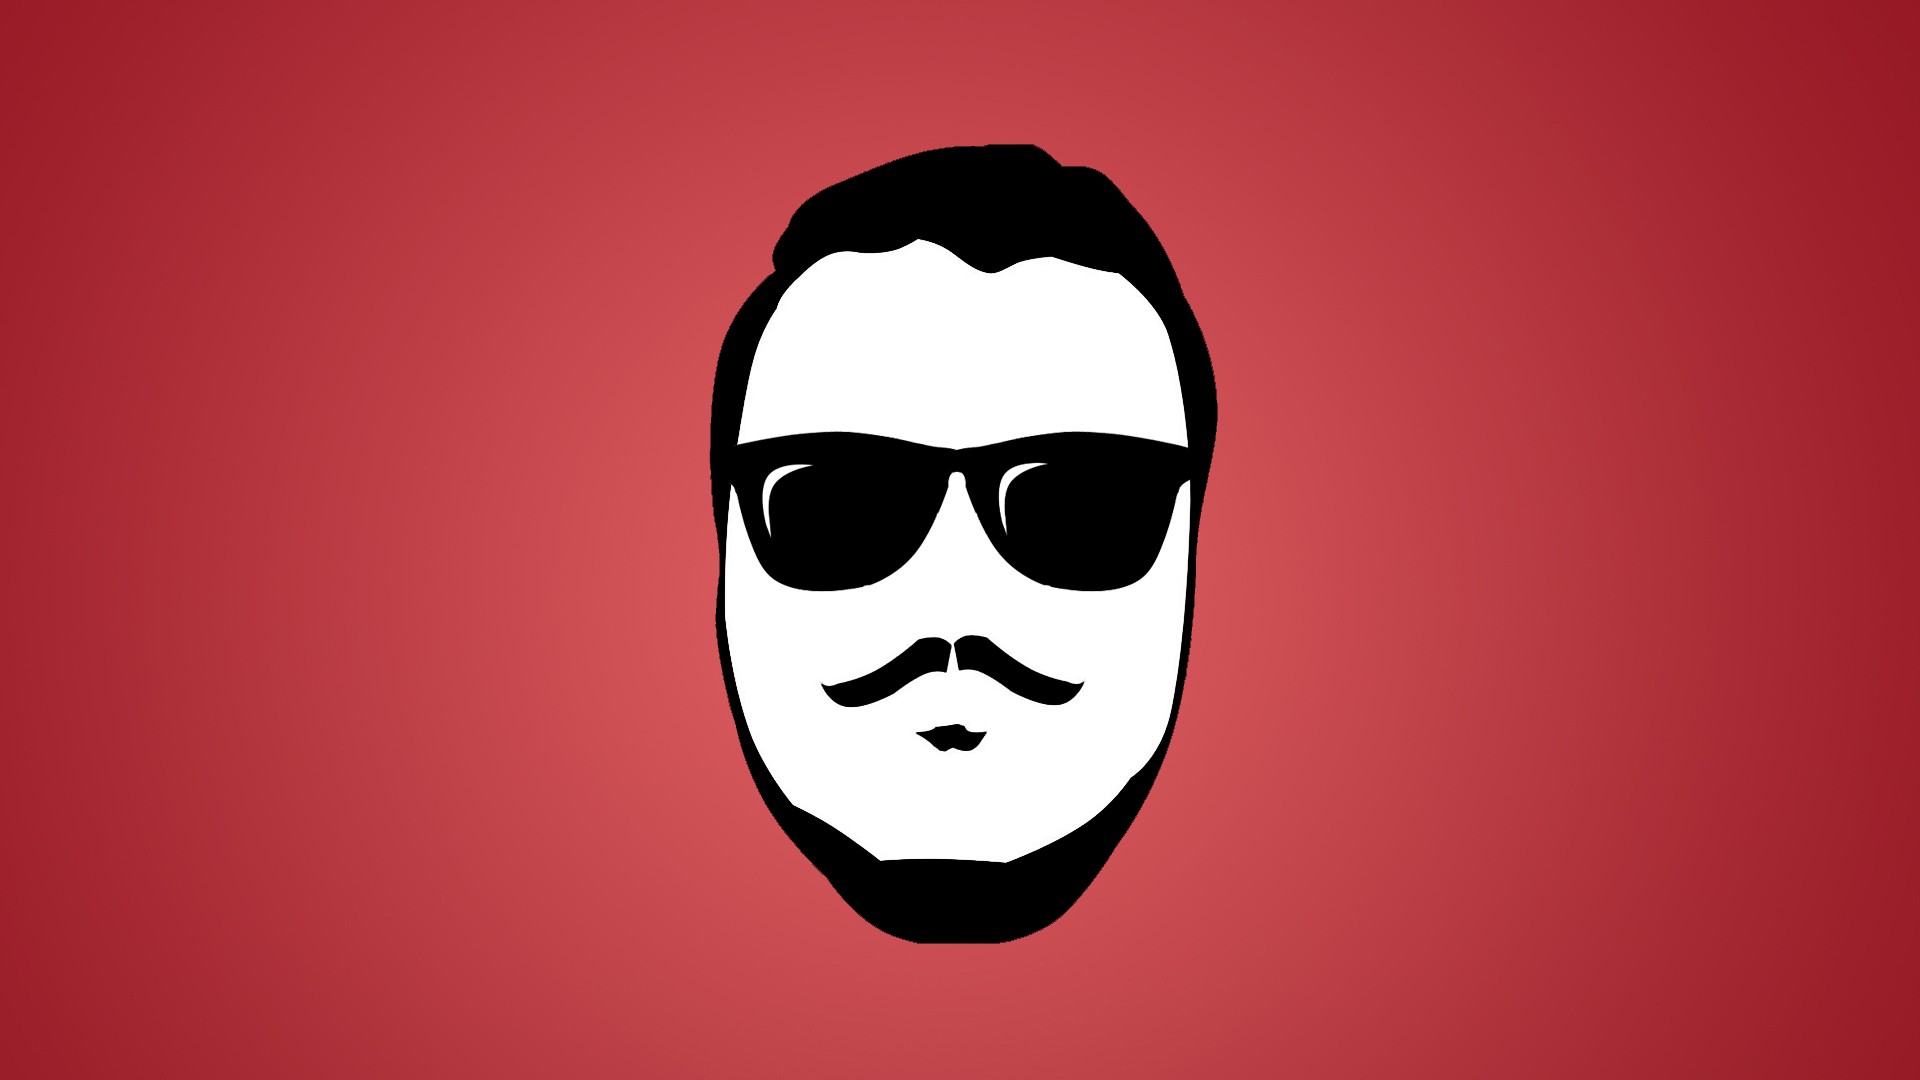 General 1920x1080 minimalism face red background sunglasses red